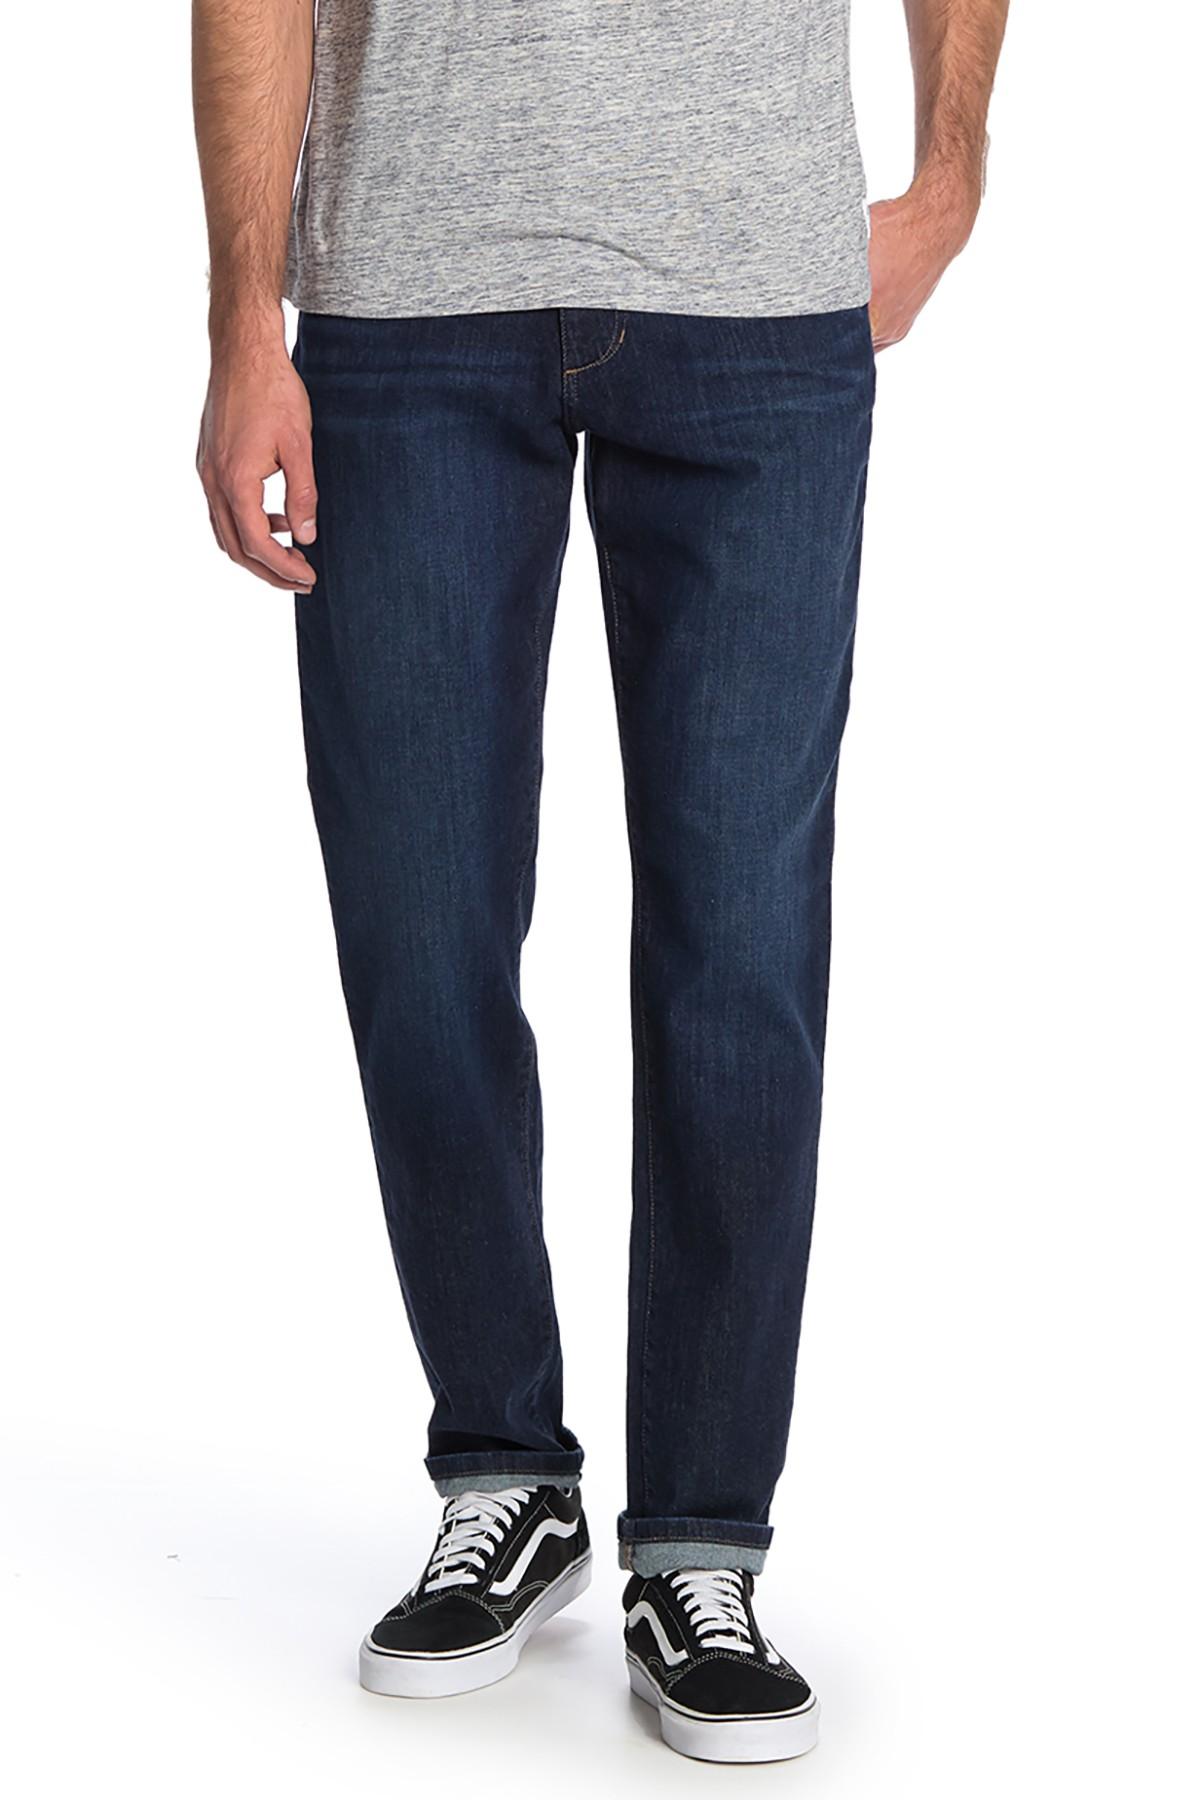 Lyst - Joe's Jeans Athletic Relaxed Slim Fit Jeans in Blue for Men